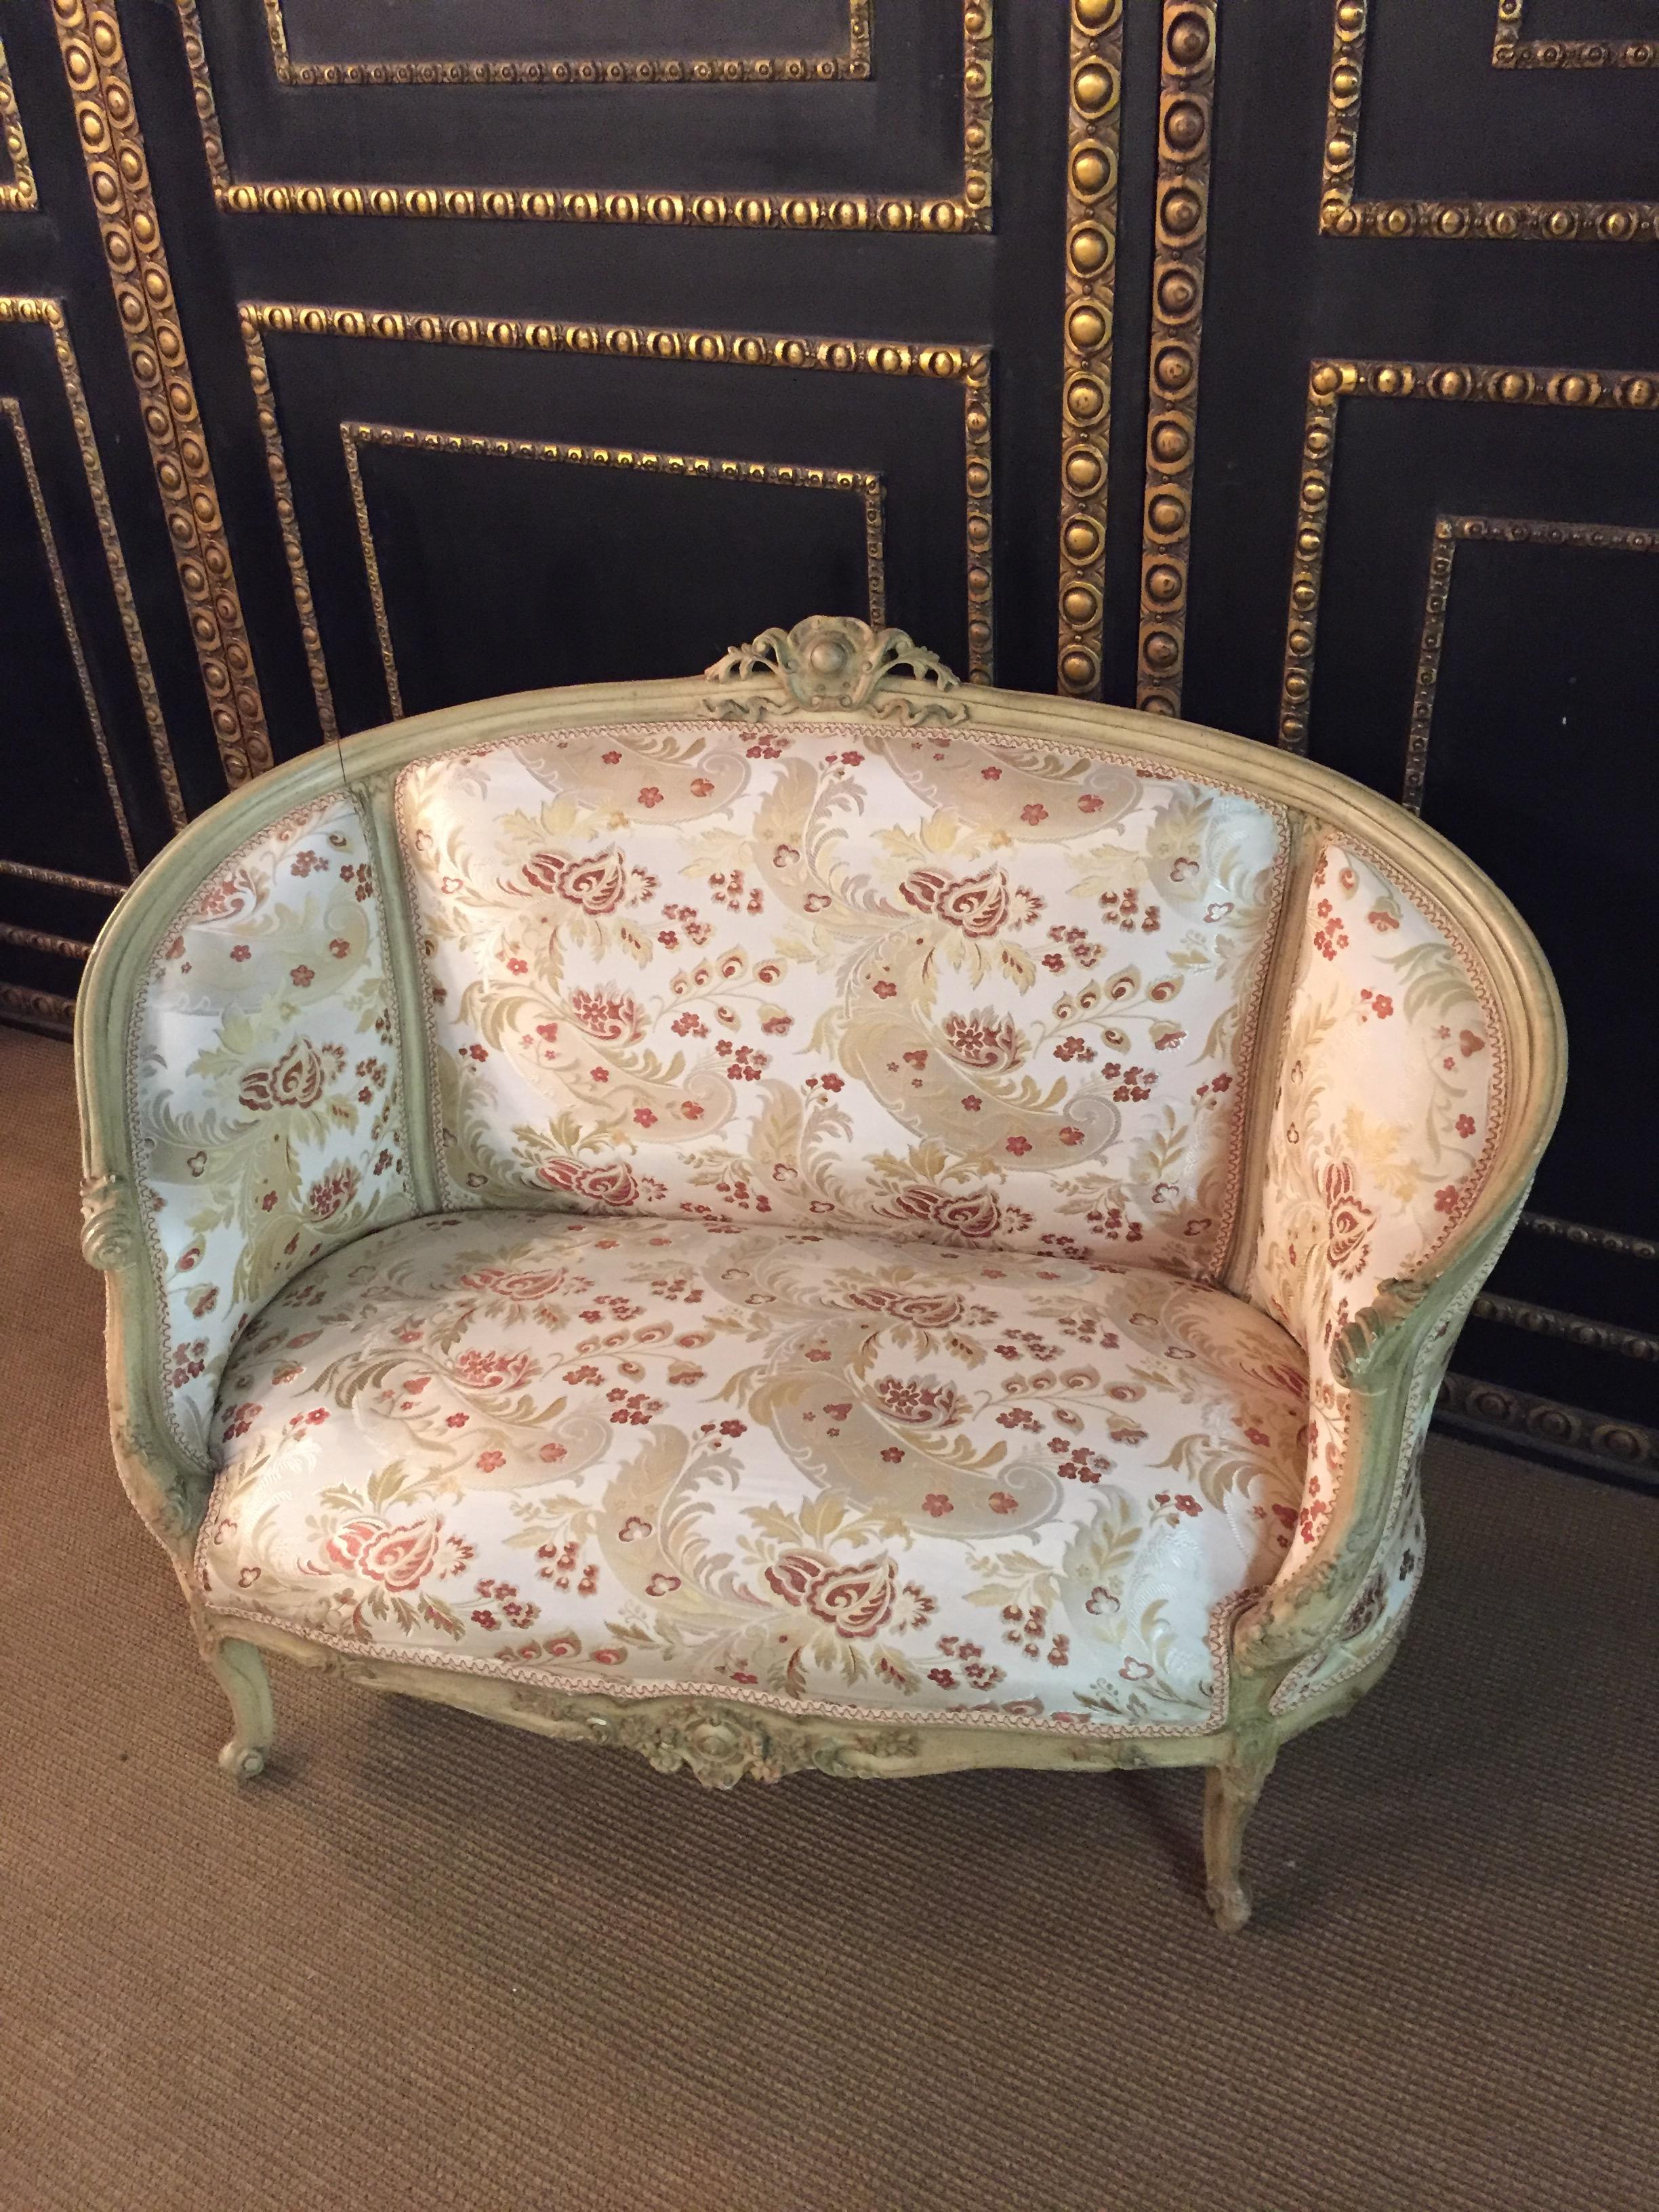 20th Century, French Sofa / canapé in antique Louis Quinze Style For Sale 10